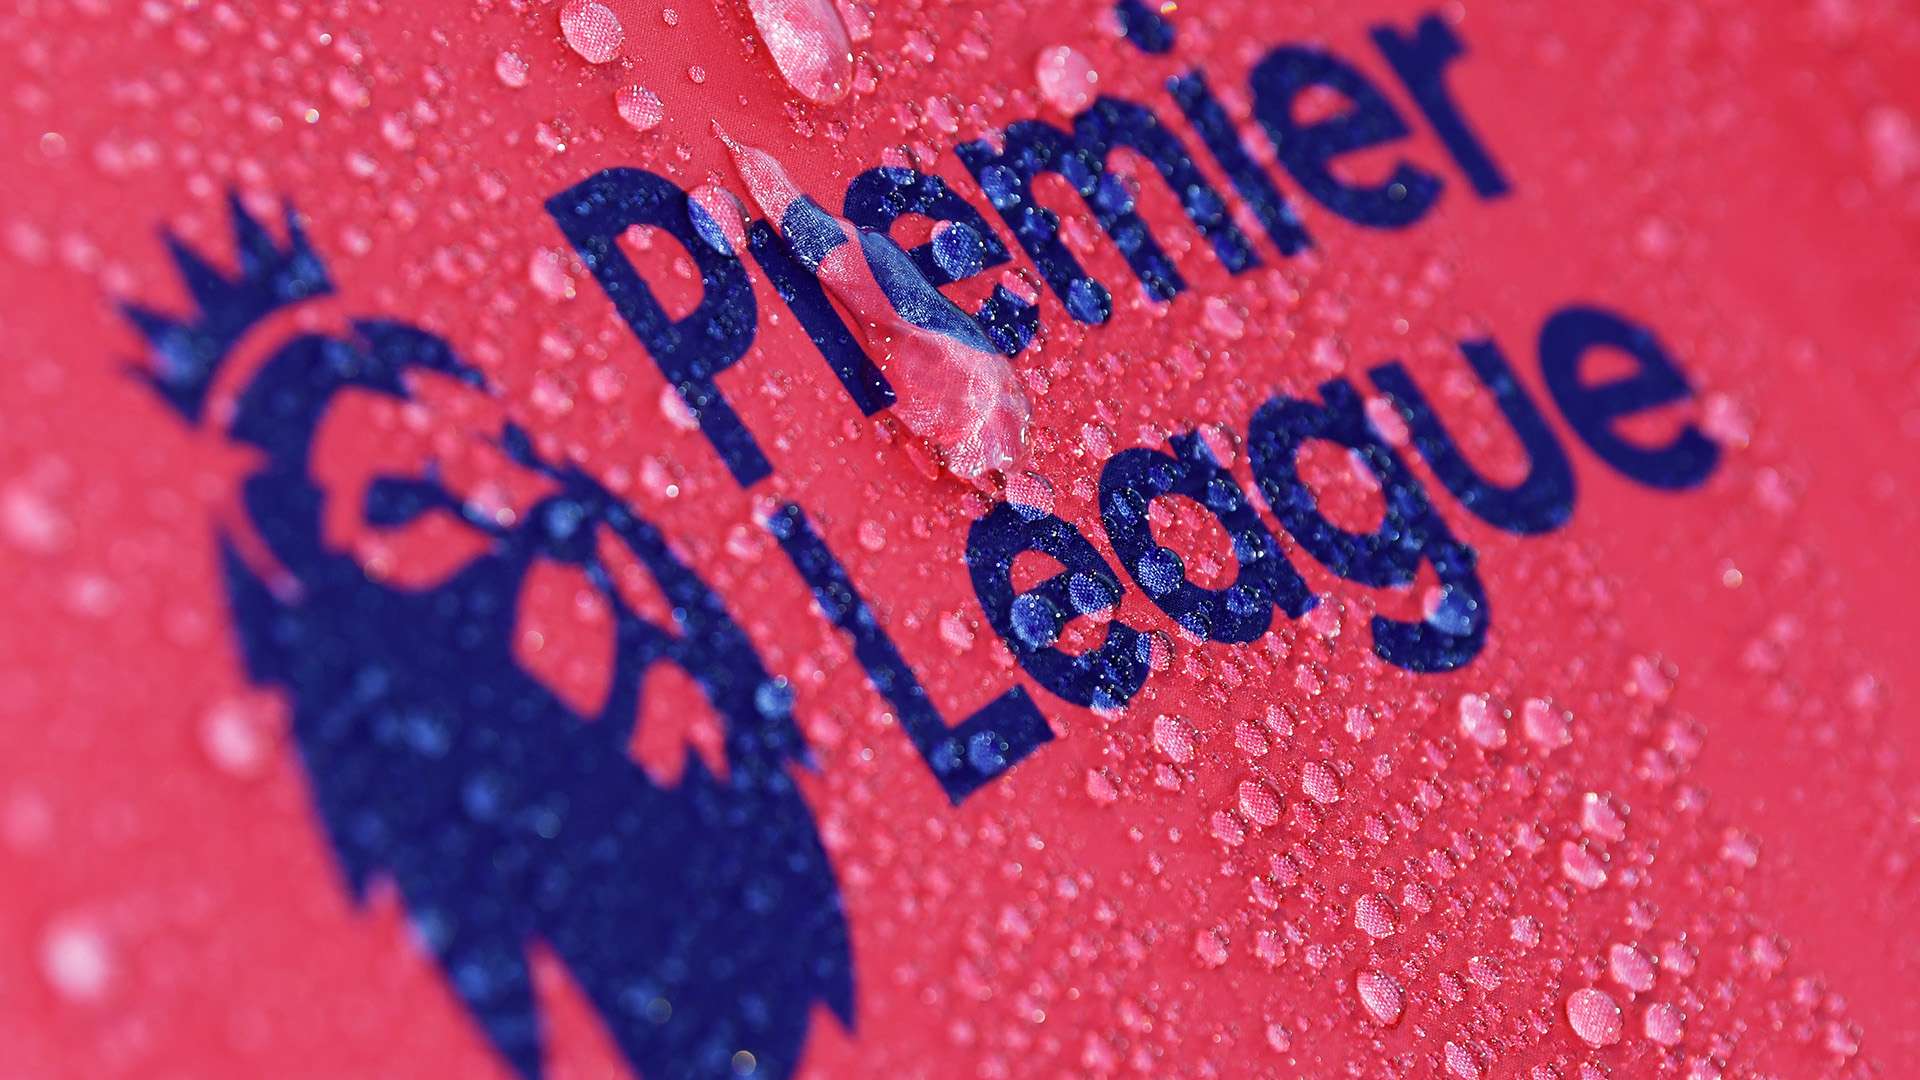 Fantasy football: What Premier League games are there & tips on how to play